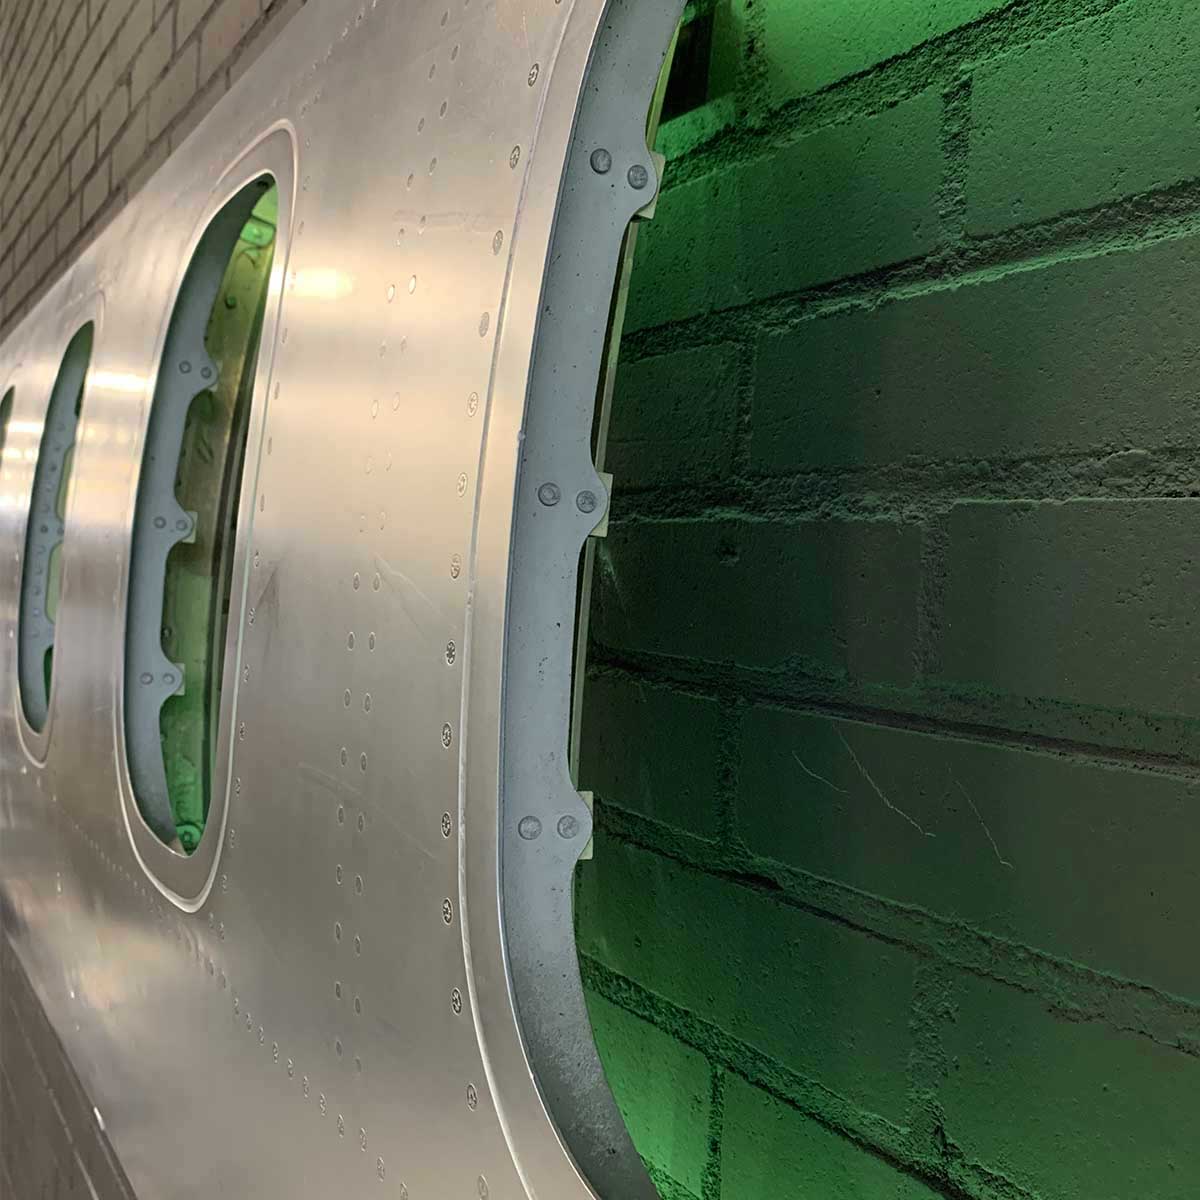 Detail showing green colours on a six-window panel of an ATR passenger aircraft turned into a decorative piece.